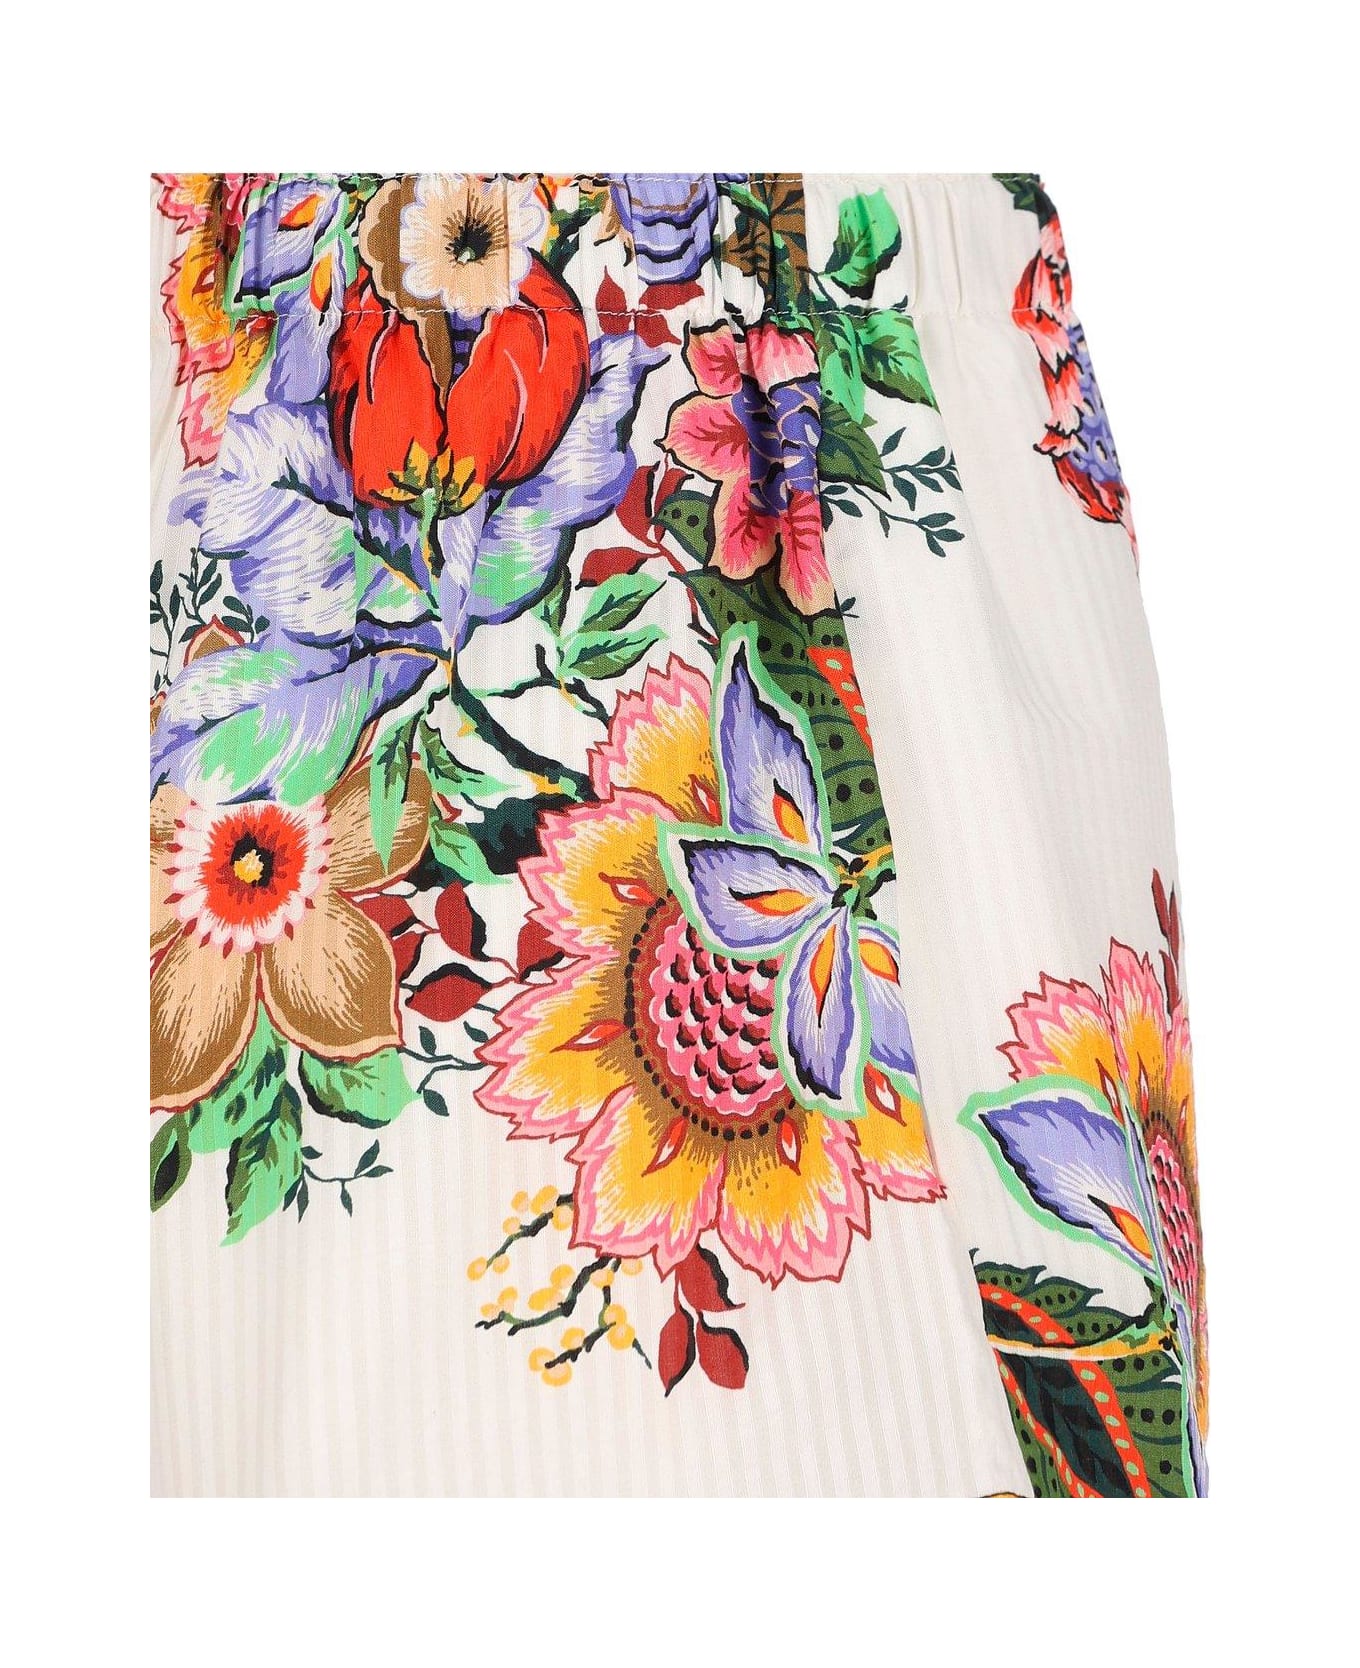 Etro Floral Printed Elasticated Waist Shorts